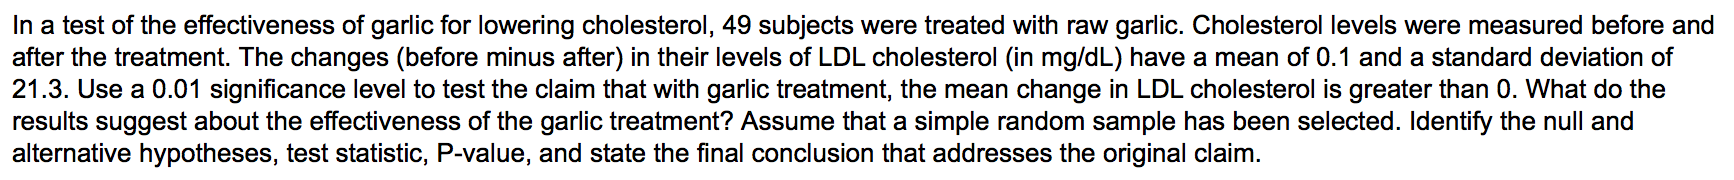 In a test of the effectiveness of garlic for lowering cholesterol, 49 subjects were treated with raw garlic. Cholesterol levels were measured before and
after the treatment. The changes (before minus after) in their levels of LDL cholesterol (in mg/dL) have a mean of 0.1 and a standard deviation of
21.3. Use a 0.01 significance level to test the claim that with garlic treatment, the mean change in LDL cholesterol is greater than 0. What do the
results suggest about the effectiveness of the garlic treatment? Assume that a simple random sample has been selected. Identify the null and
alternative hypotheses, test statistic, P-value, and state the final conclusion that addresses the original claim.
